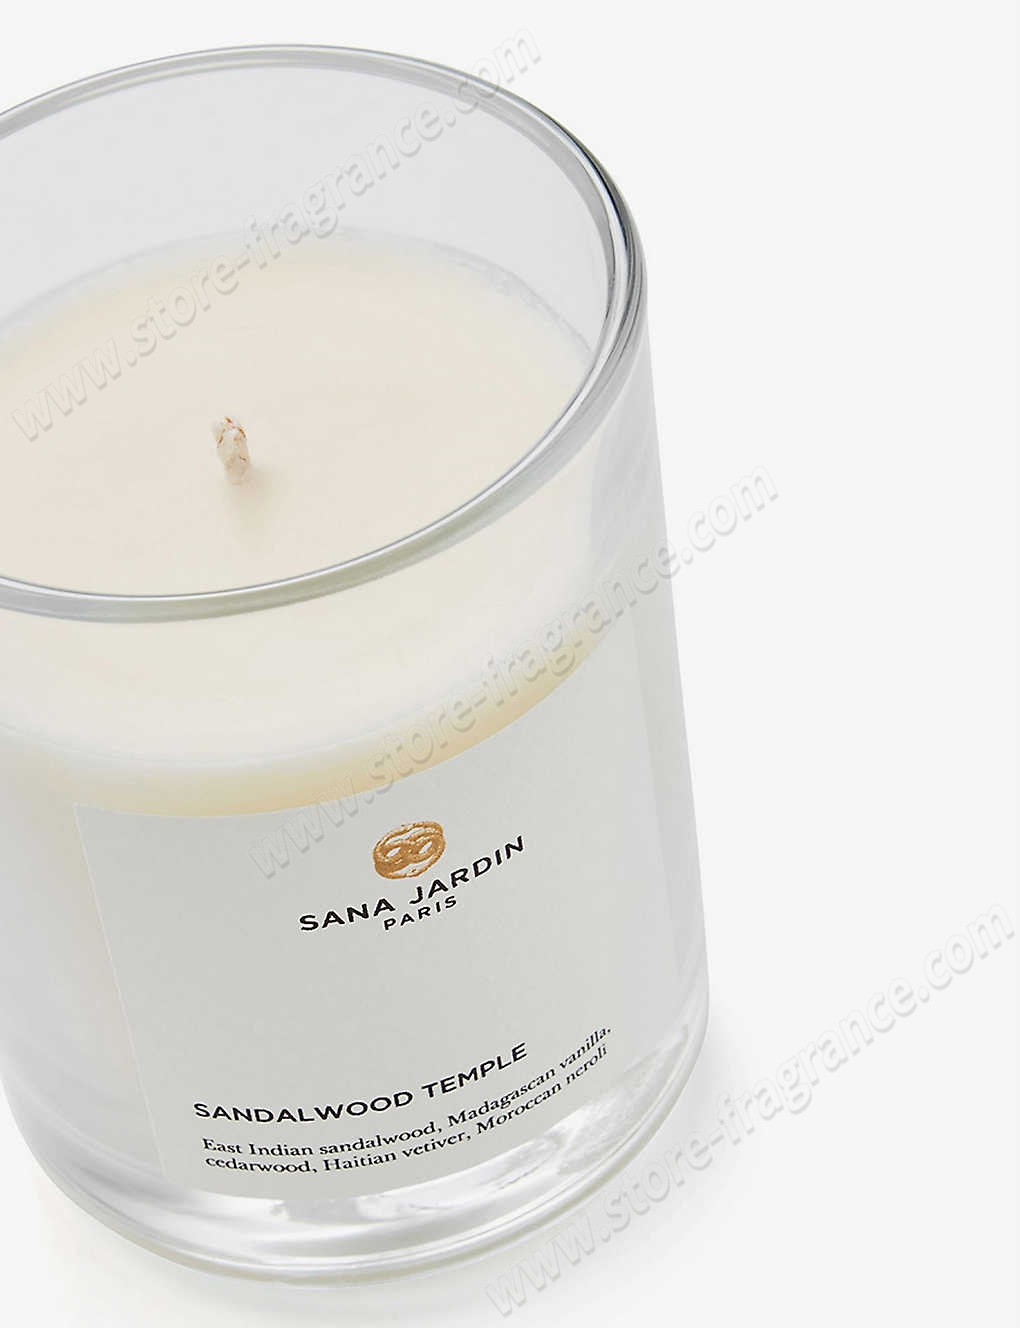 SANA JARDIN/Sandalwood Temple scented candle 190g ✿ Discount Store - -1